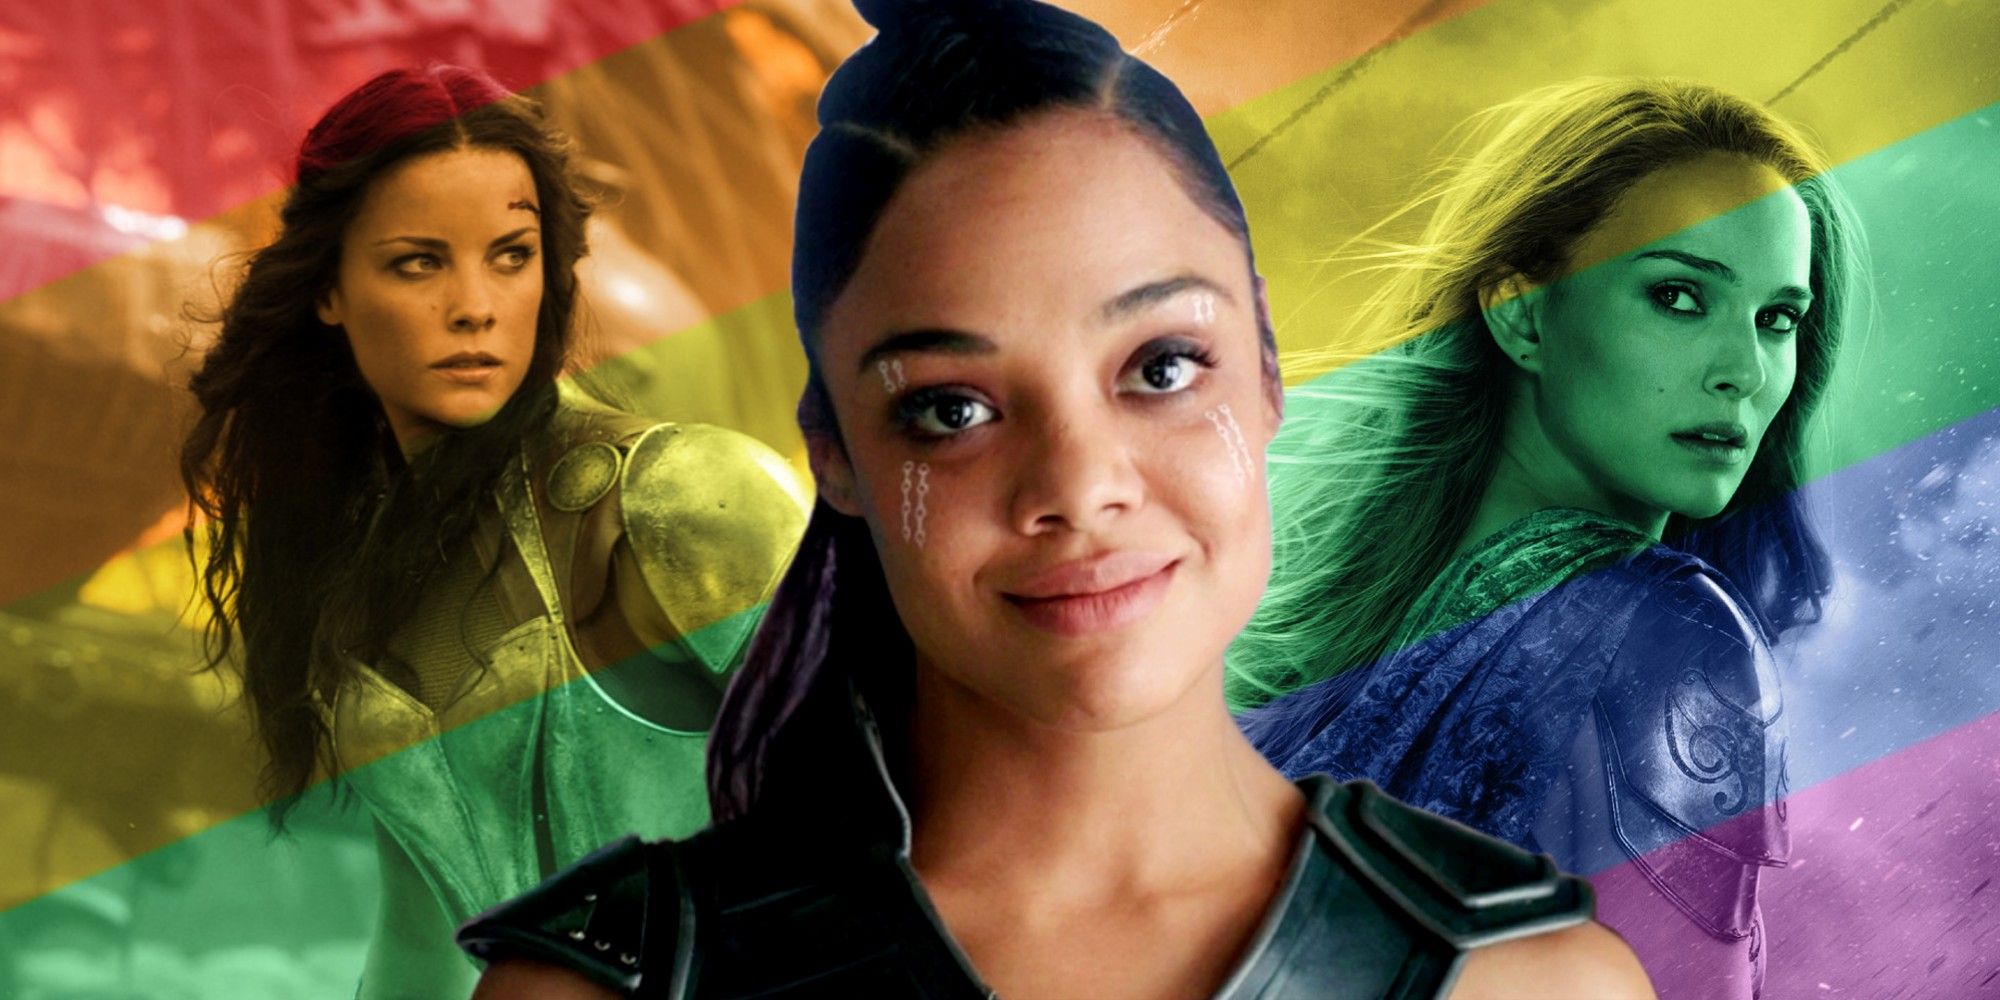 Sif, Valkyrie, and Jane Foster with a rainbow flag overlaid on them